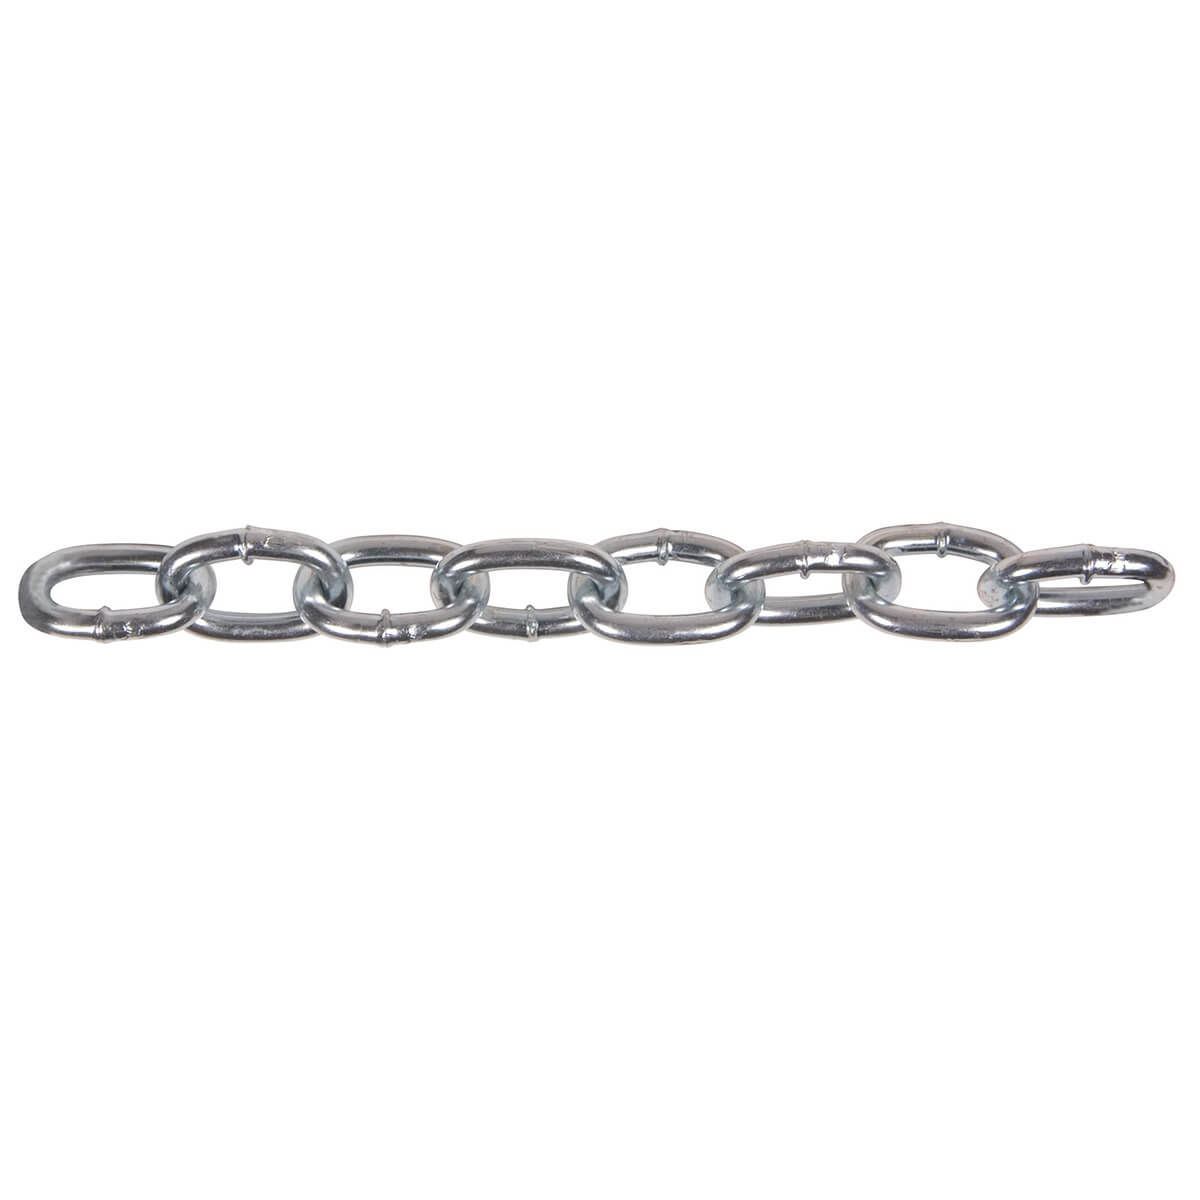 Passing Link Chain - Low Carbon Steel